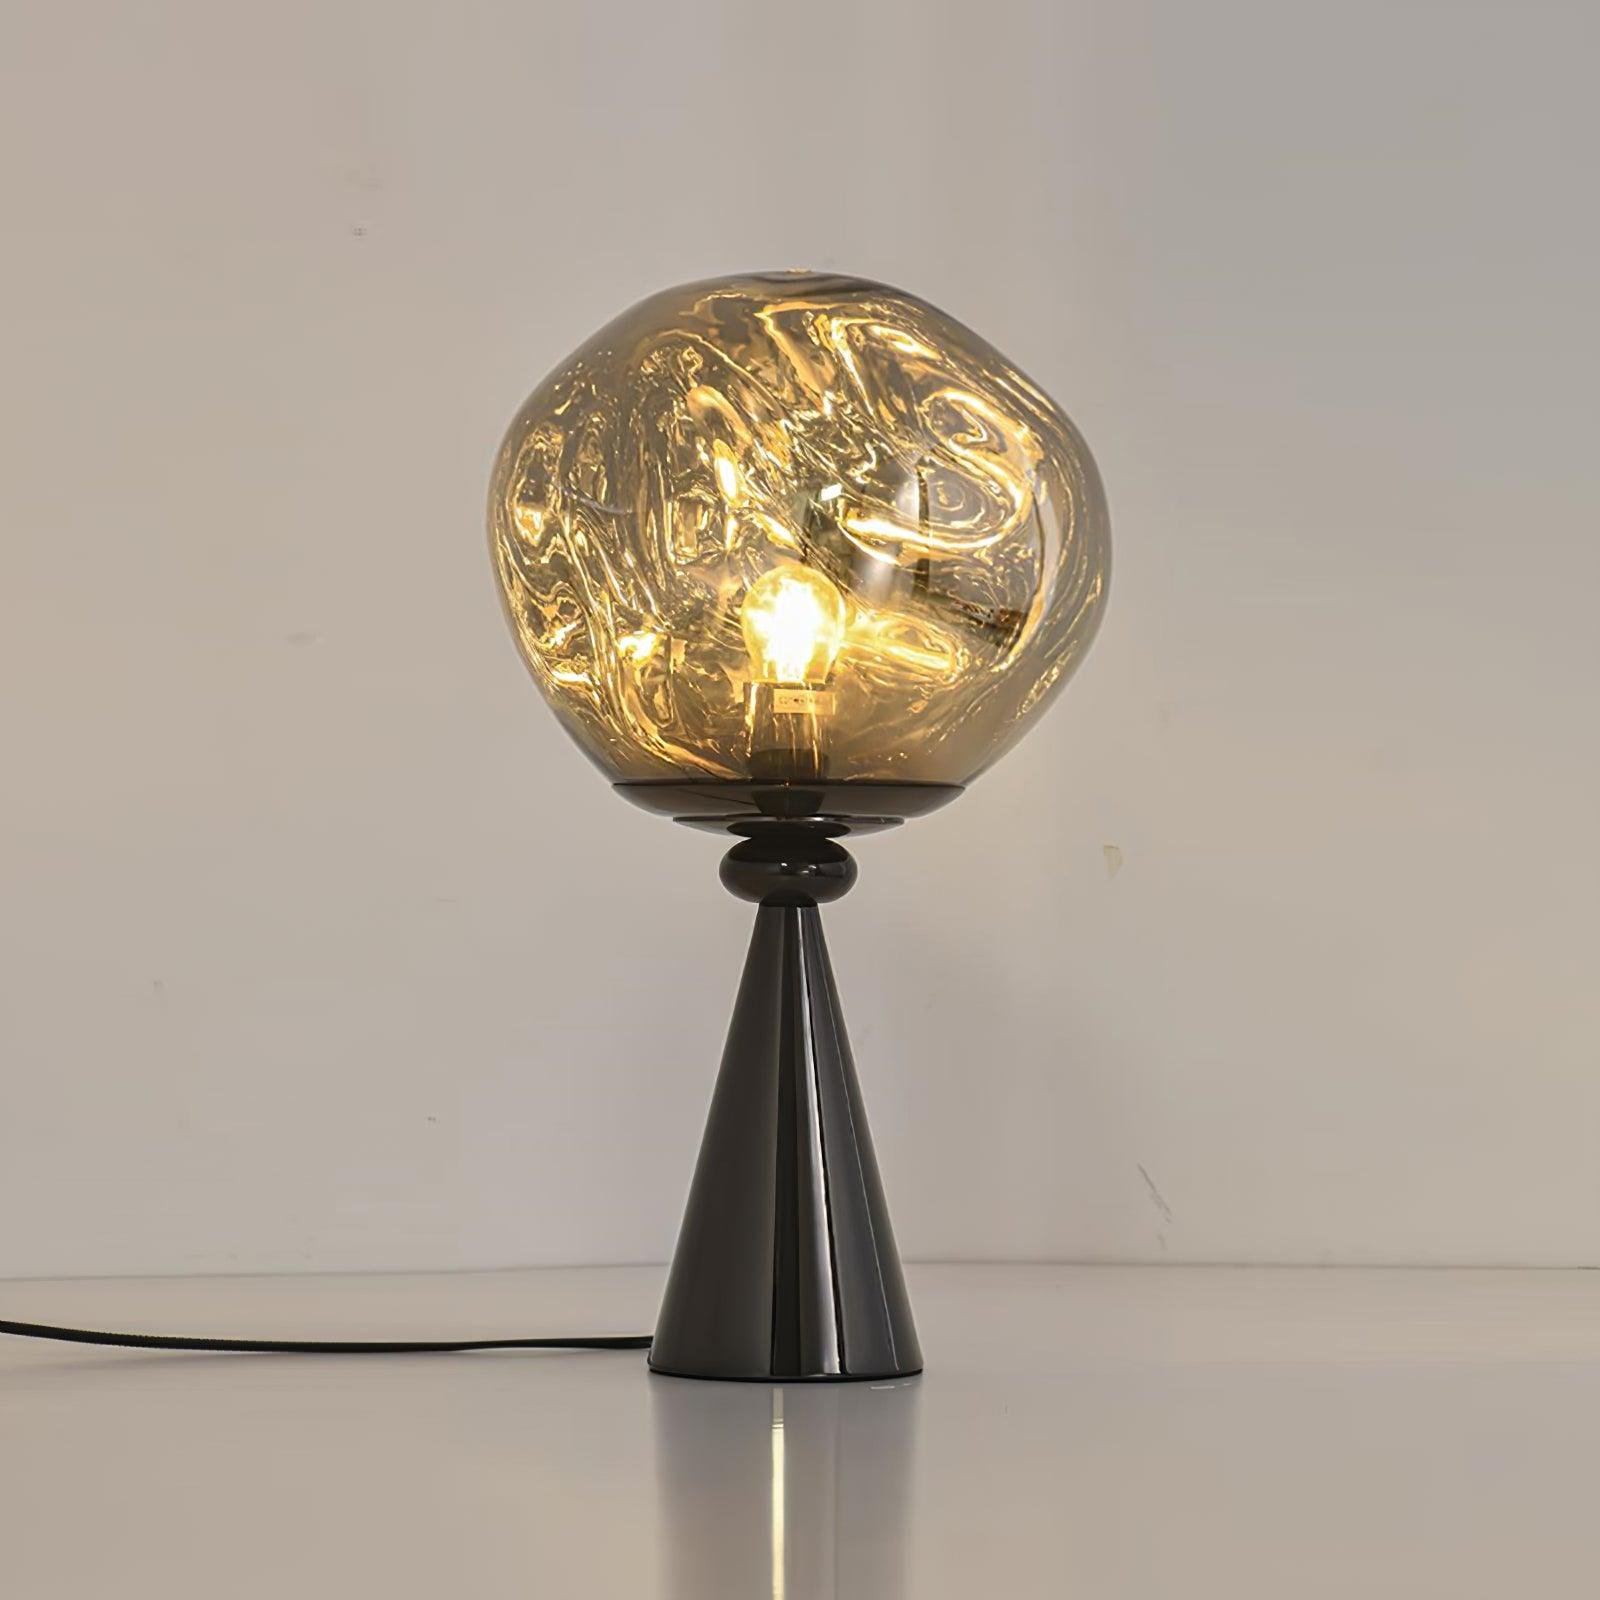 Black and Smoky Melt Cone Table Lamp - UK Plug, Diameter 11 inches x Height 17.7 inches (28cm x 45cm)